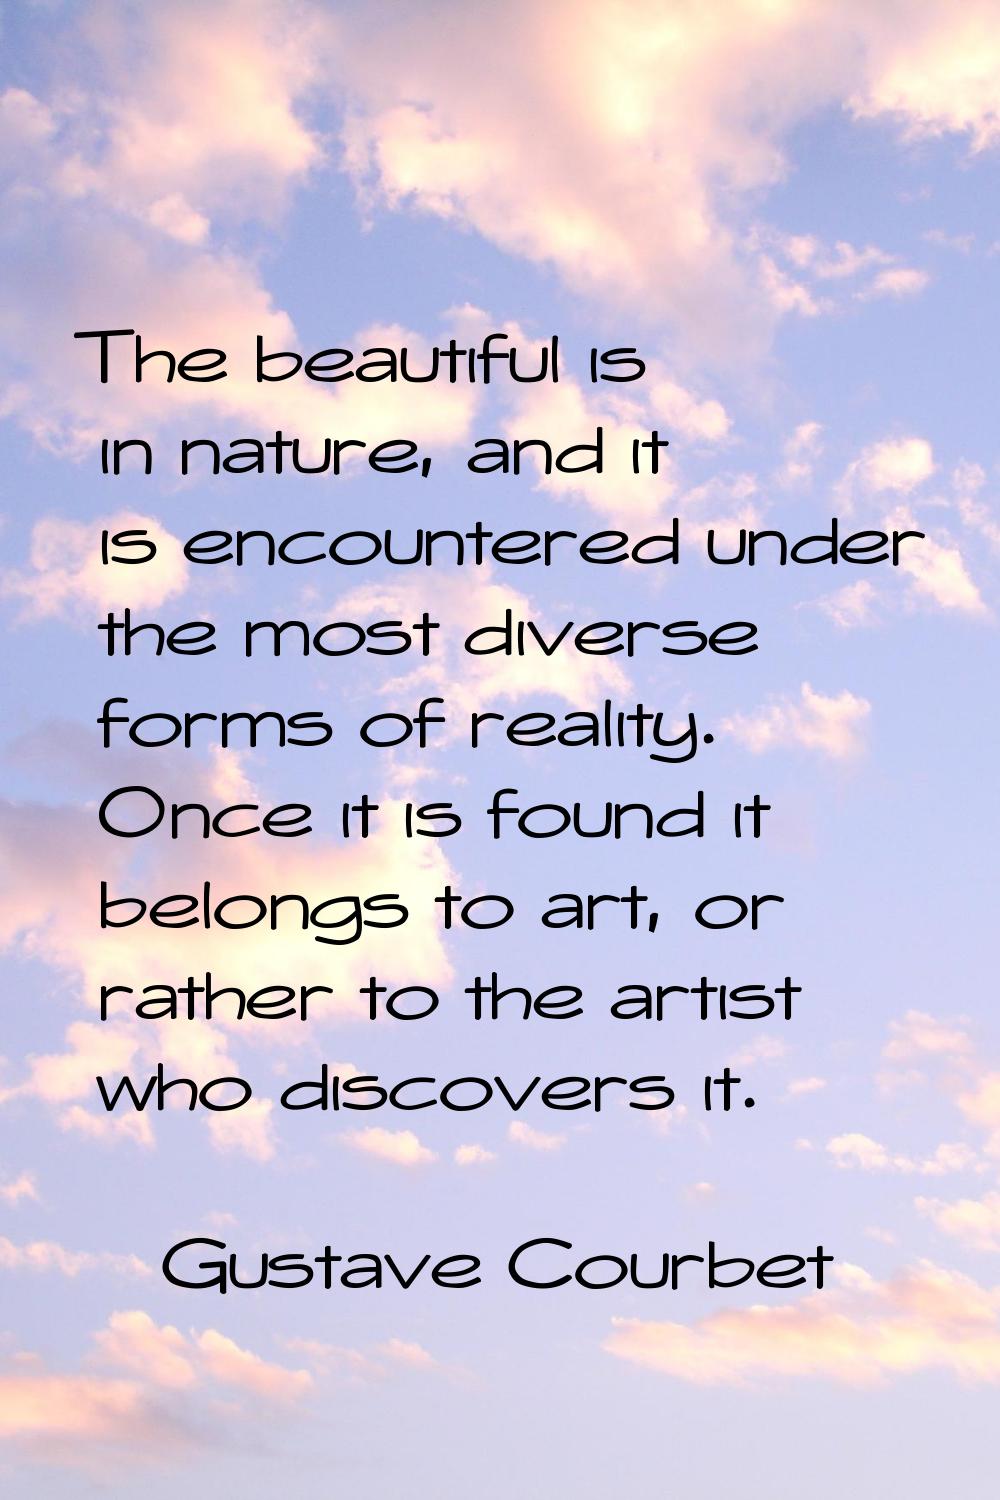 The beautiful is in nature, and it is encountered under the most diverse forms of reality. Once it 